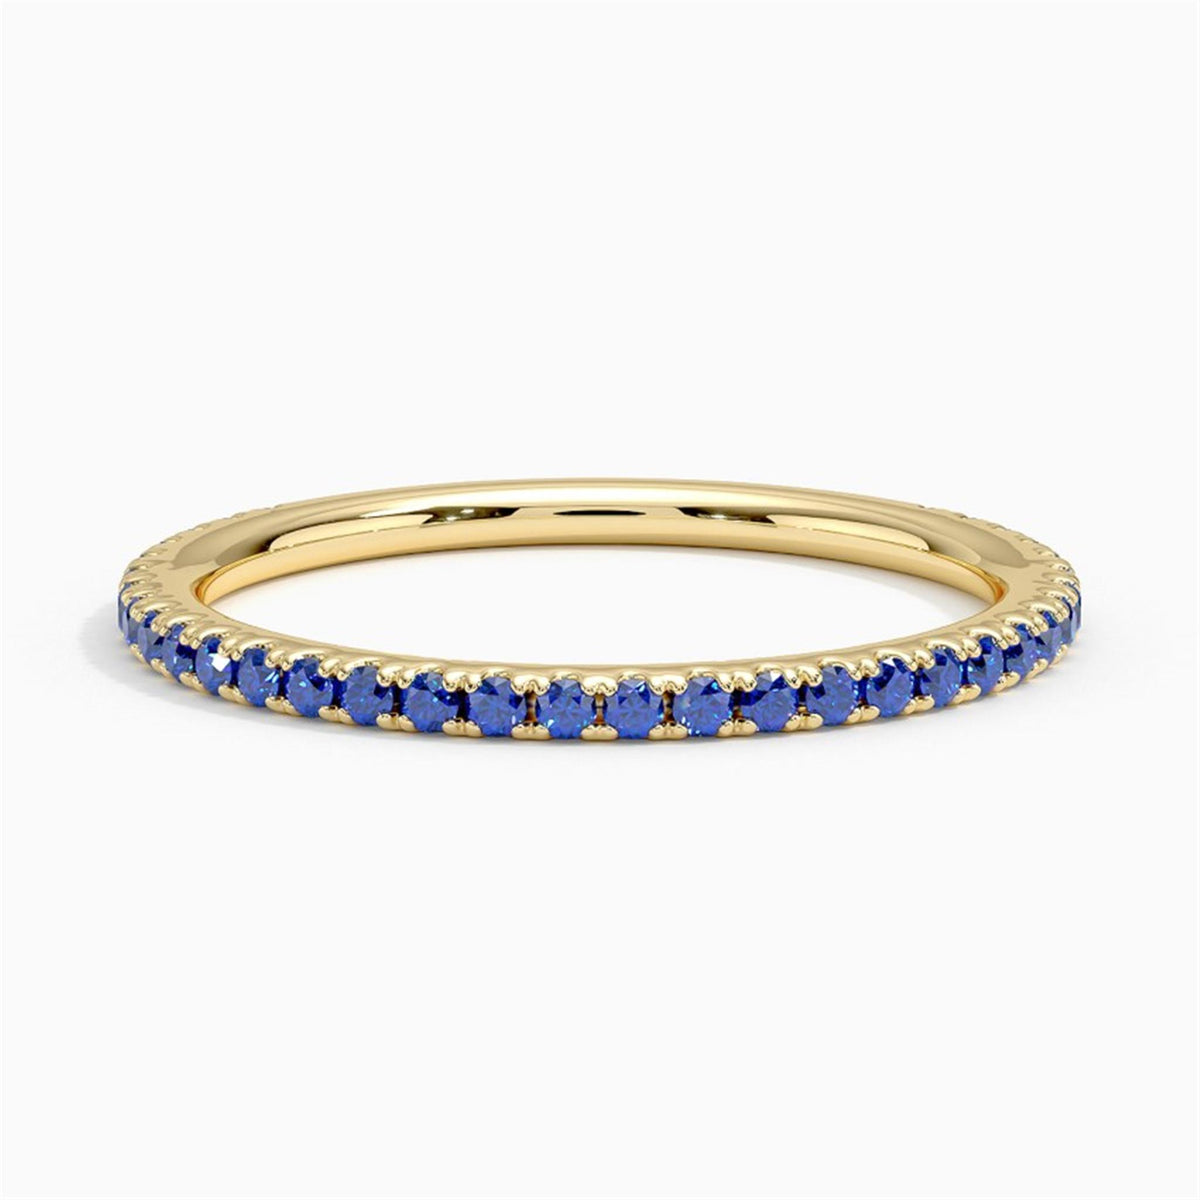 14Kt Yellow Gold Stackable Gemstone Ring With Blue Sapphires